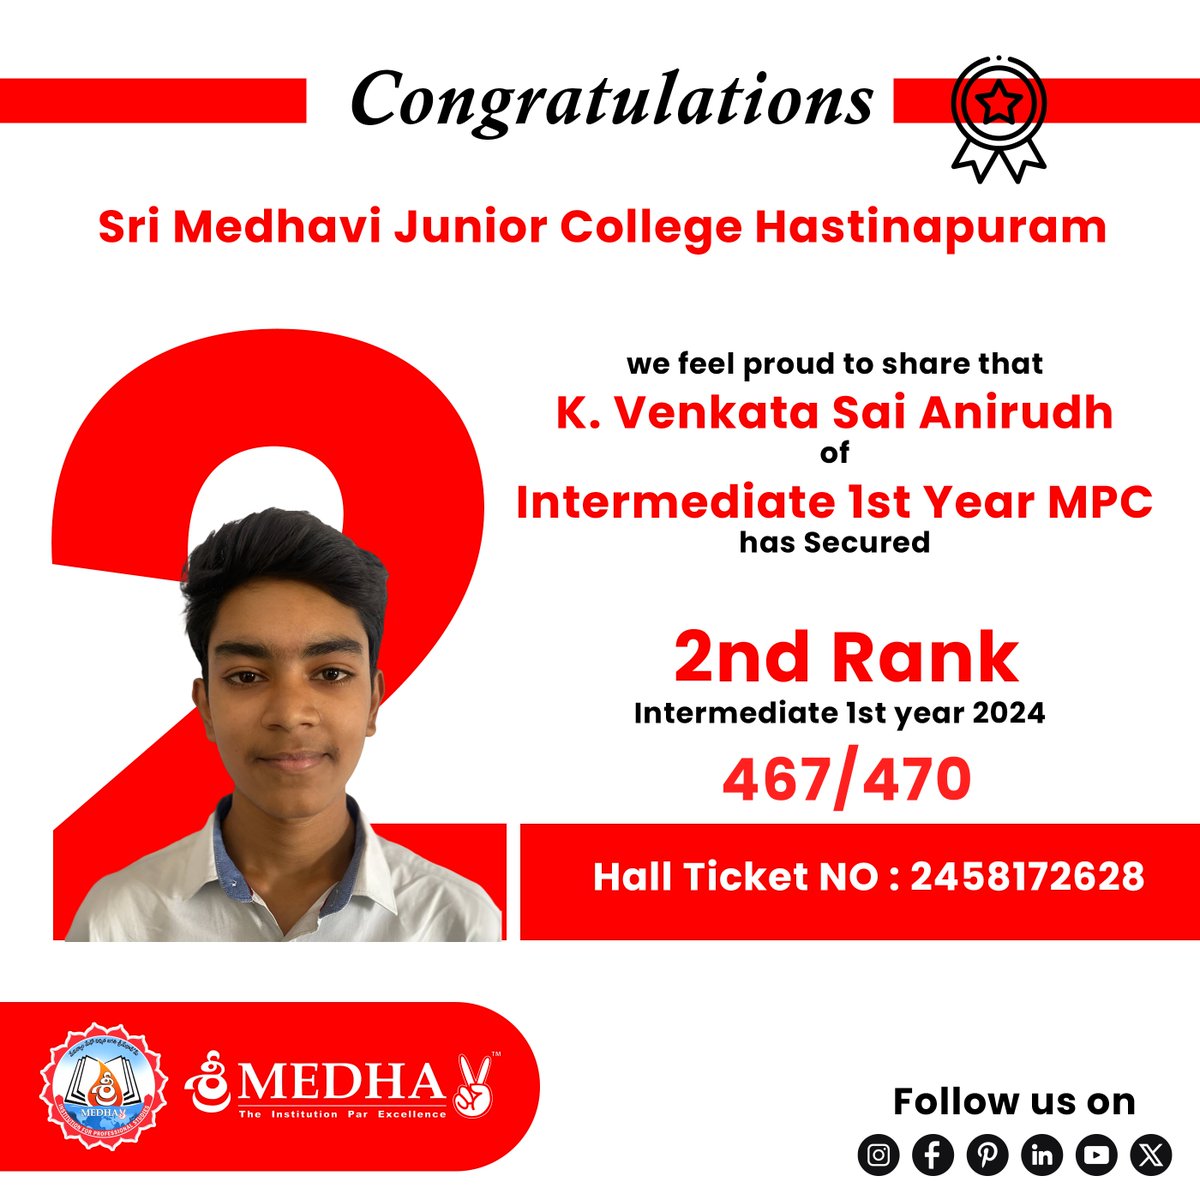 we feel Proud to share that Our Students K.venkata sai Anirudh and O.Praveen got 2nd & 4th ranks in the intermediates 2024 Examination

#srimedhavi #tsresults2024 #Telangana #collegesnearyamjal #collegenearme #staterank
#collegesinhyderaba #JuniorCollege